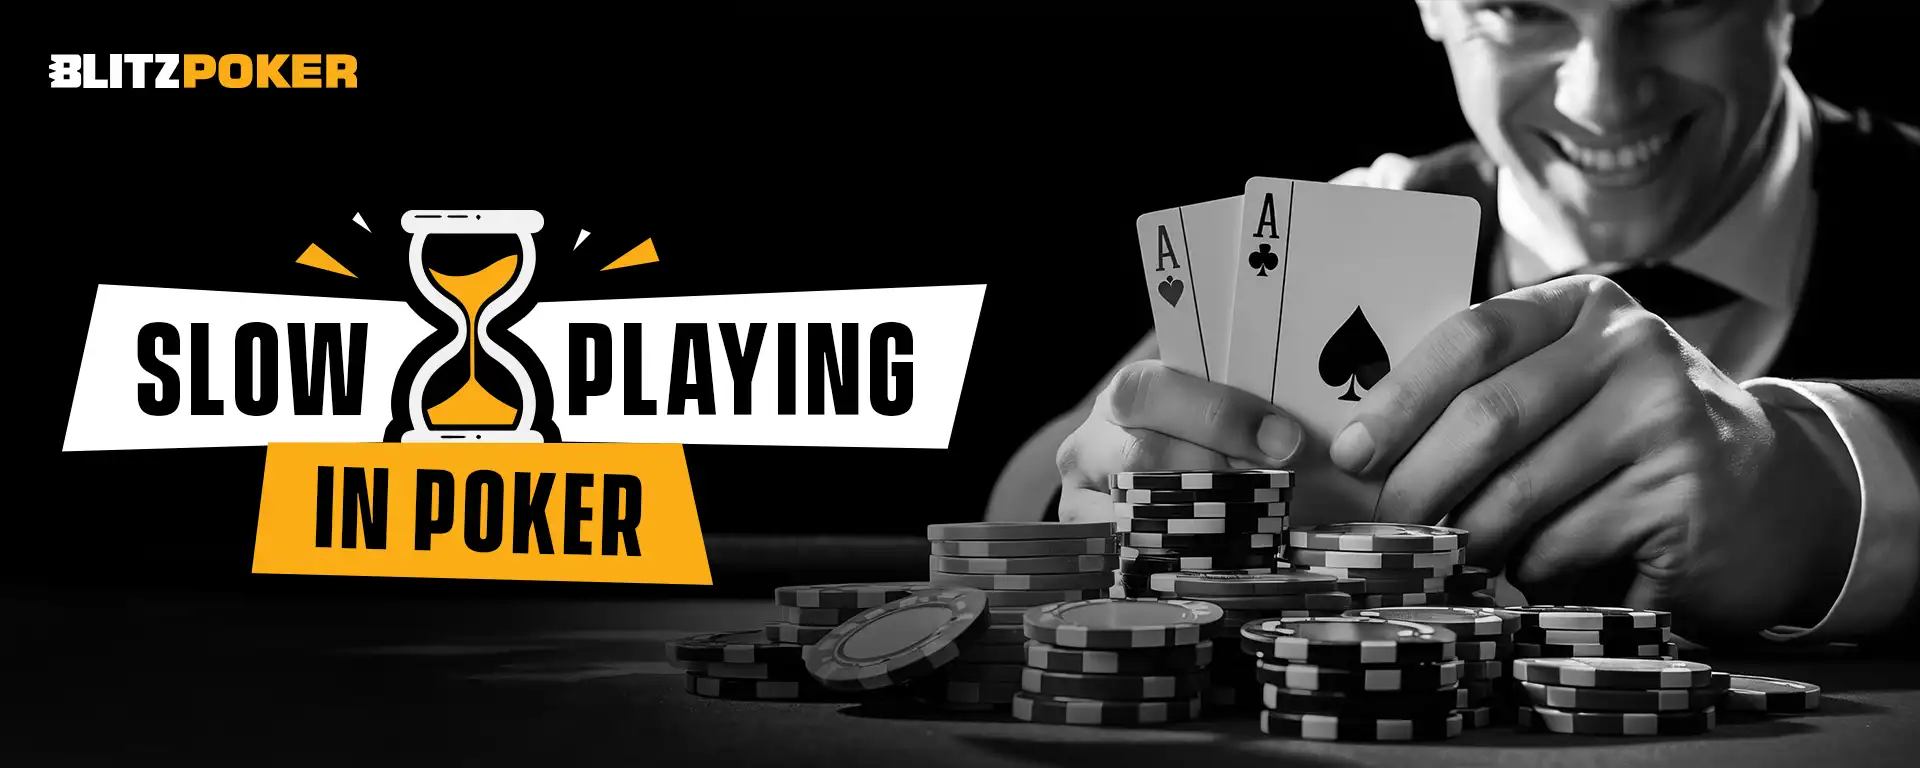 Slow Playing in Poker: Meaning, Strategies, Do’s & Don’ts Etc.